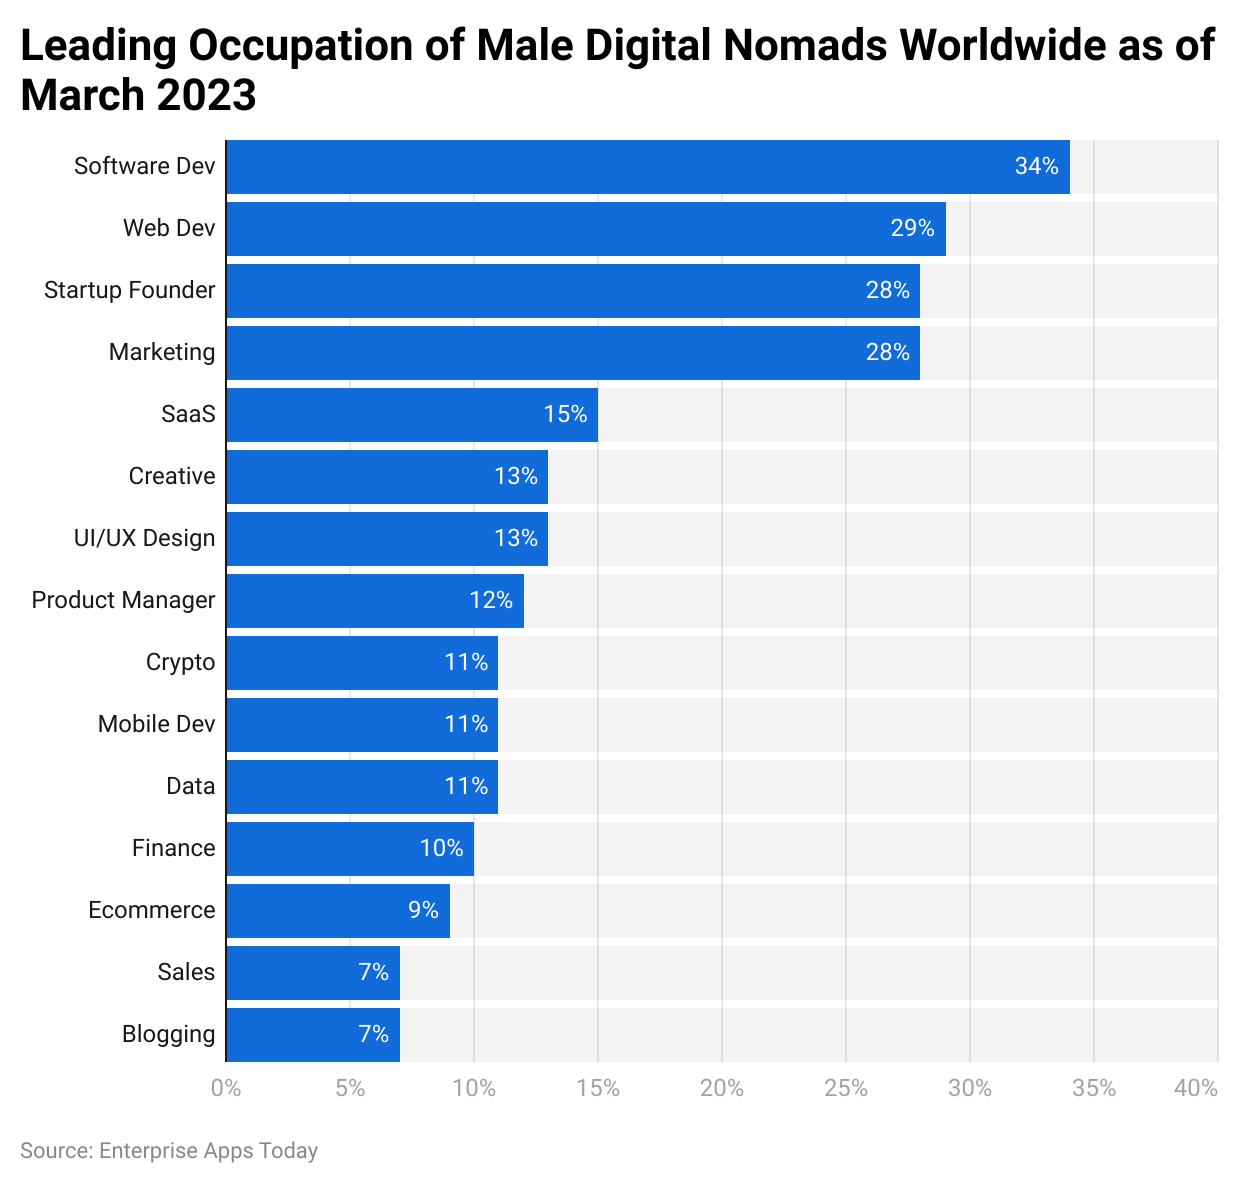 Leading occupation of male digital nomads worldwide as of March 2023